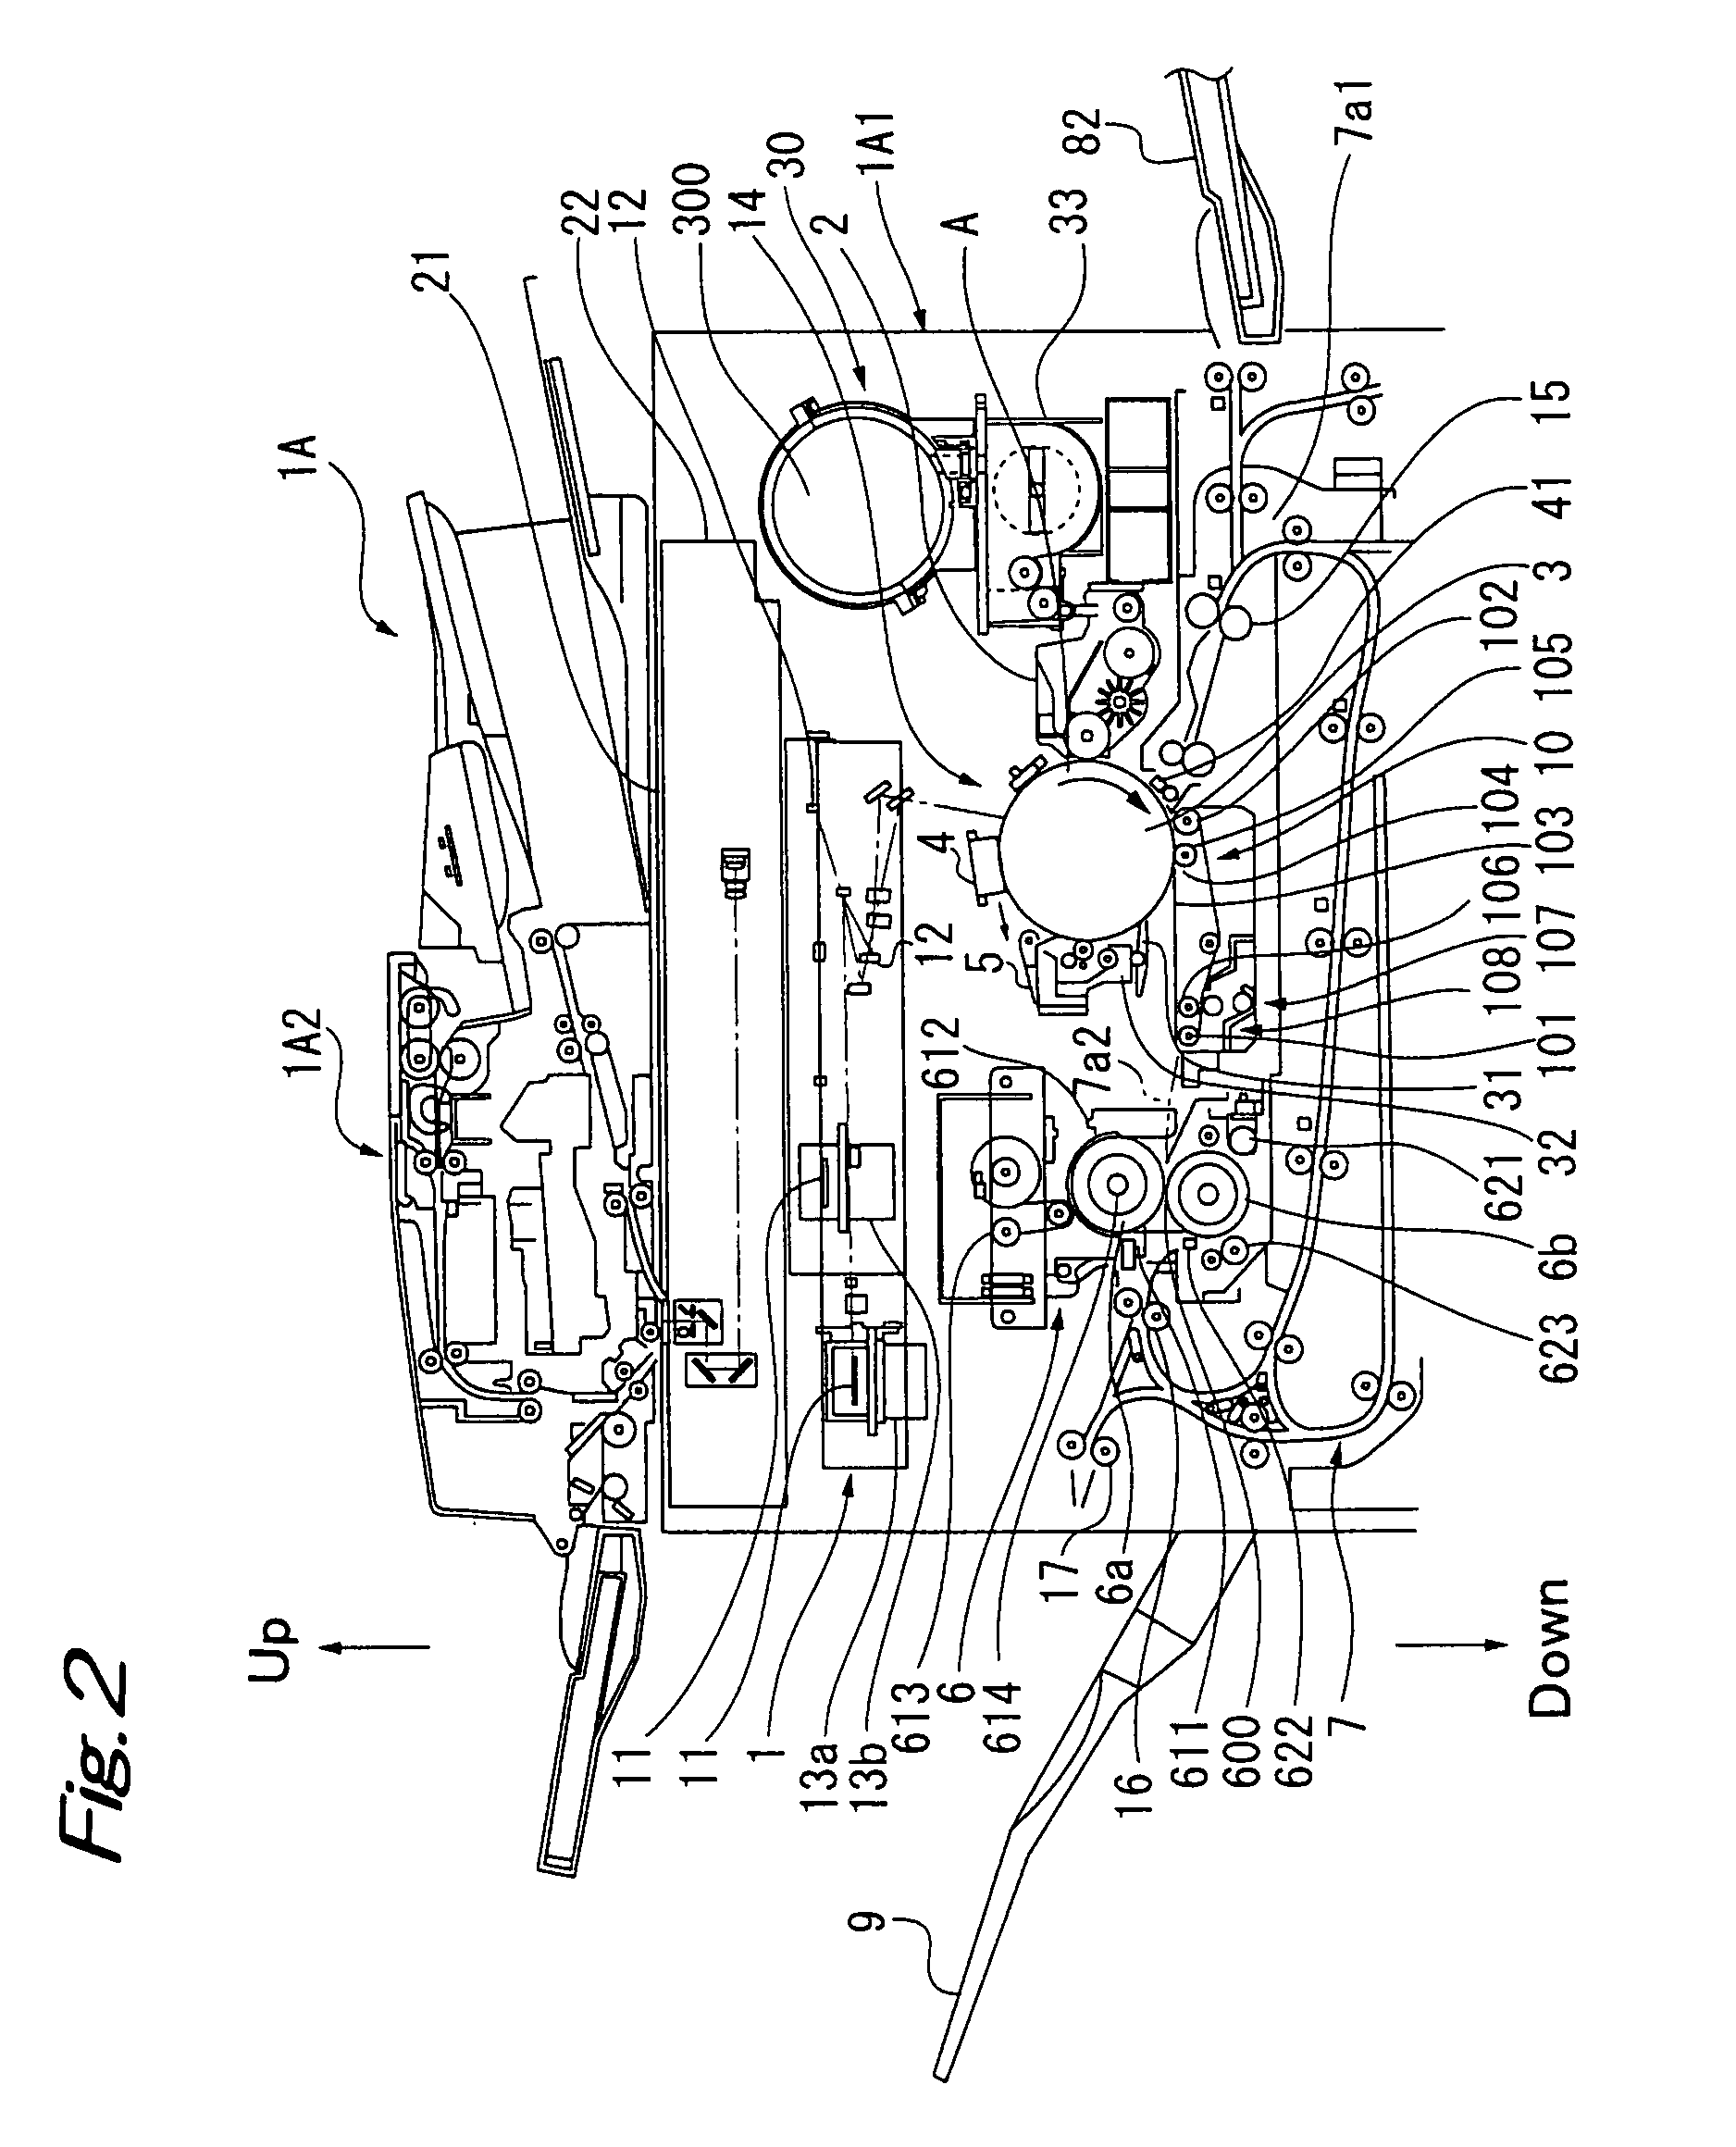 Toner container, toner feed device and image forming apparatus